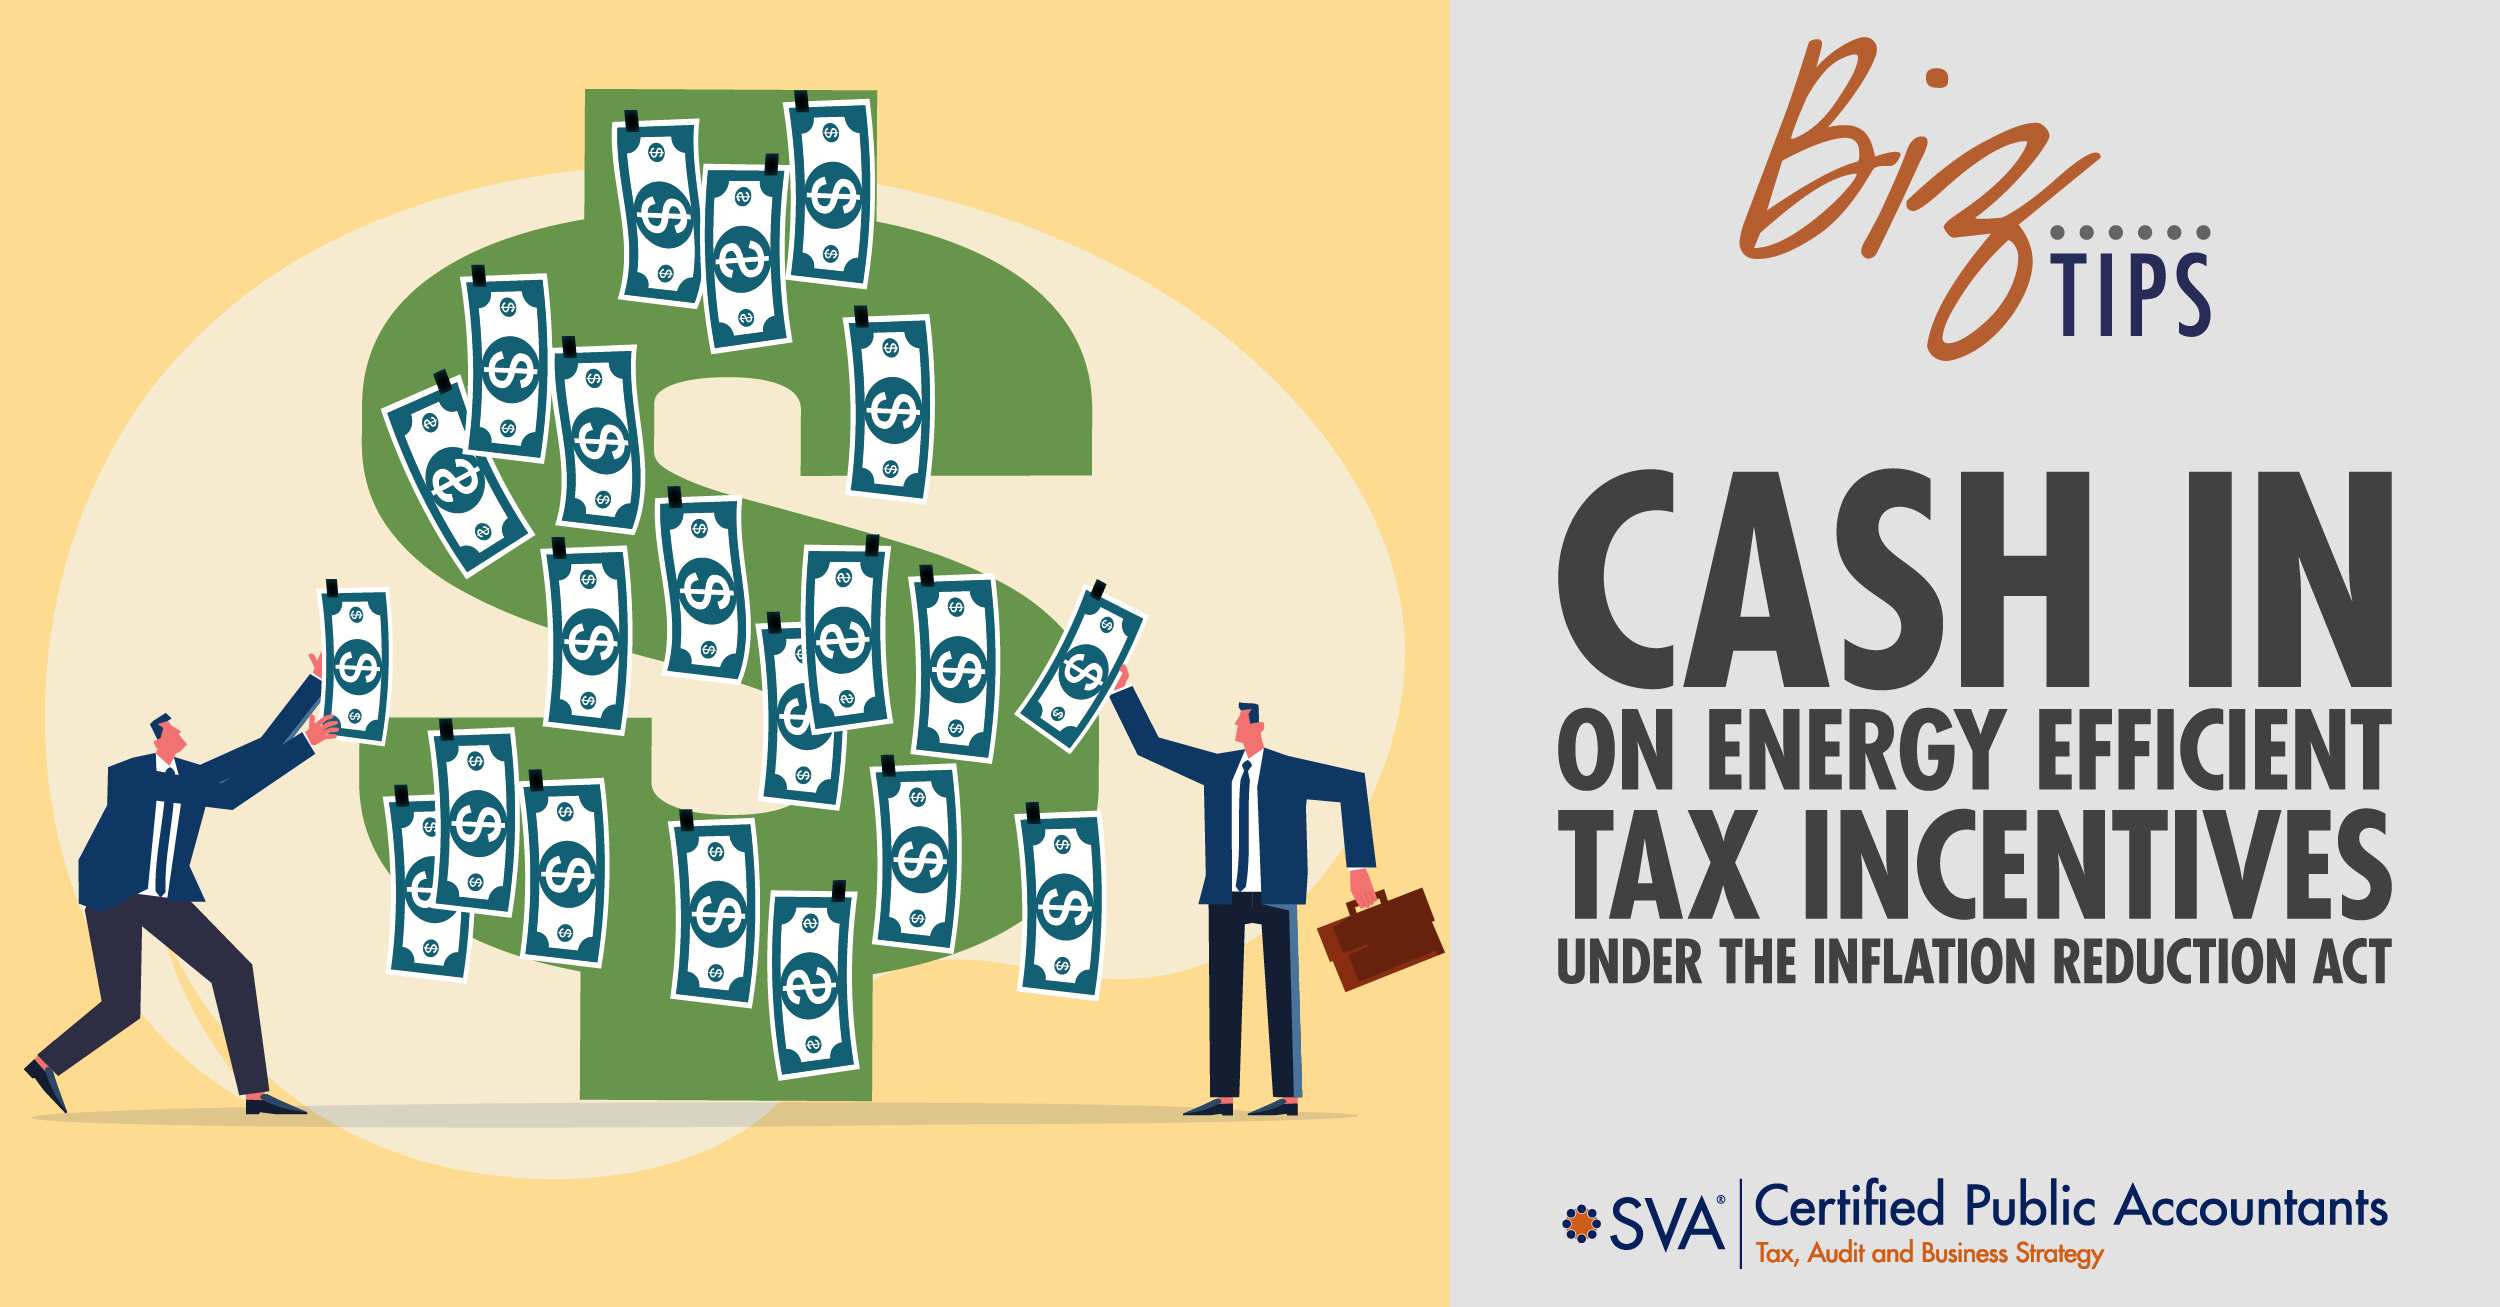 Cash In on Energy Efficient Tax Incentives Under the Inflation Reduction Act